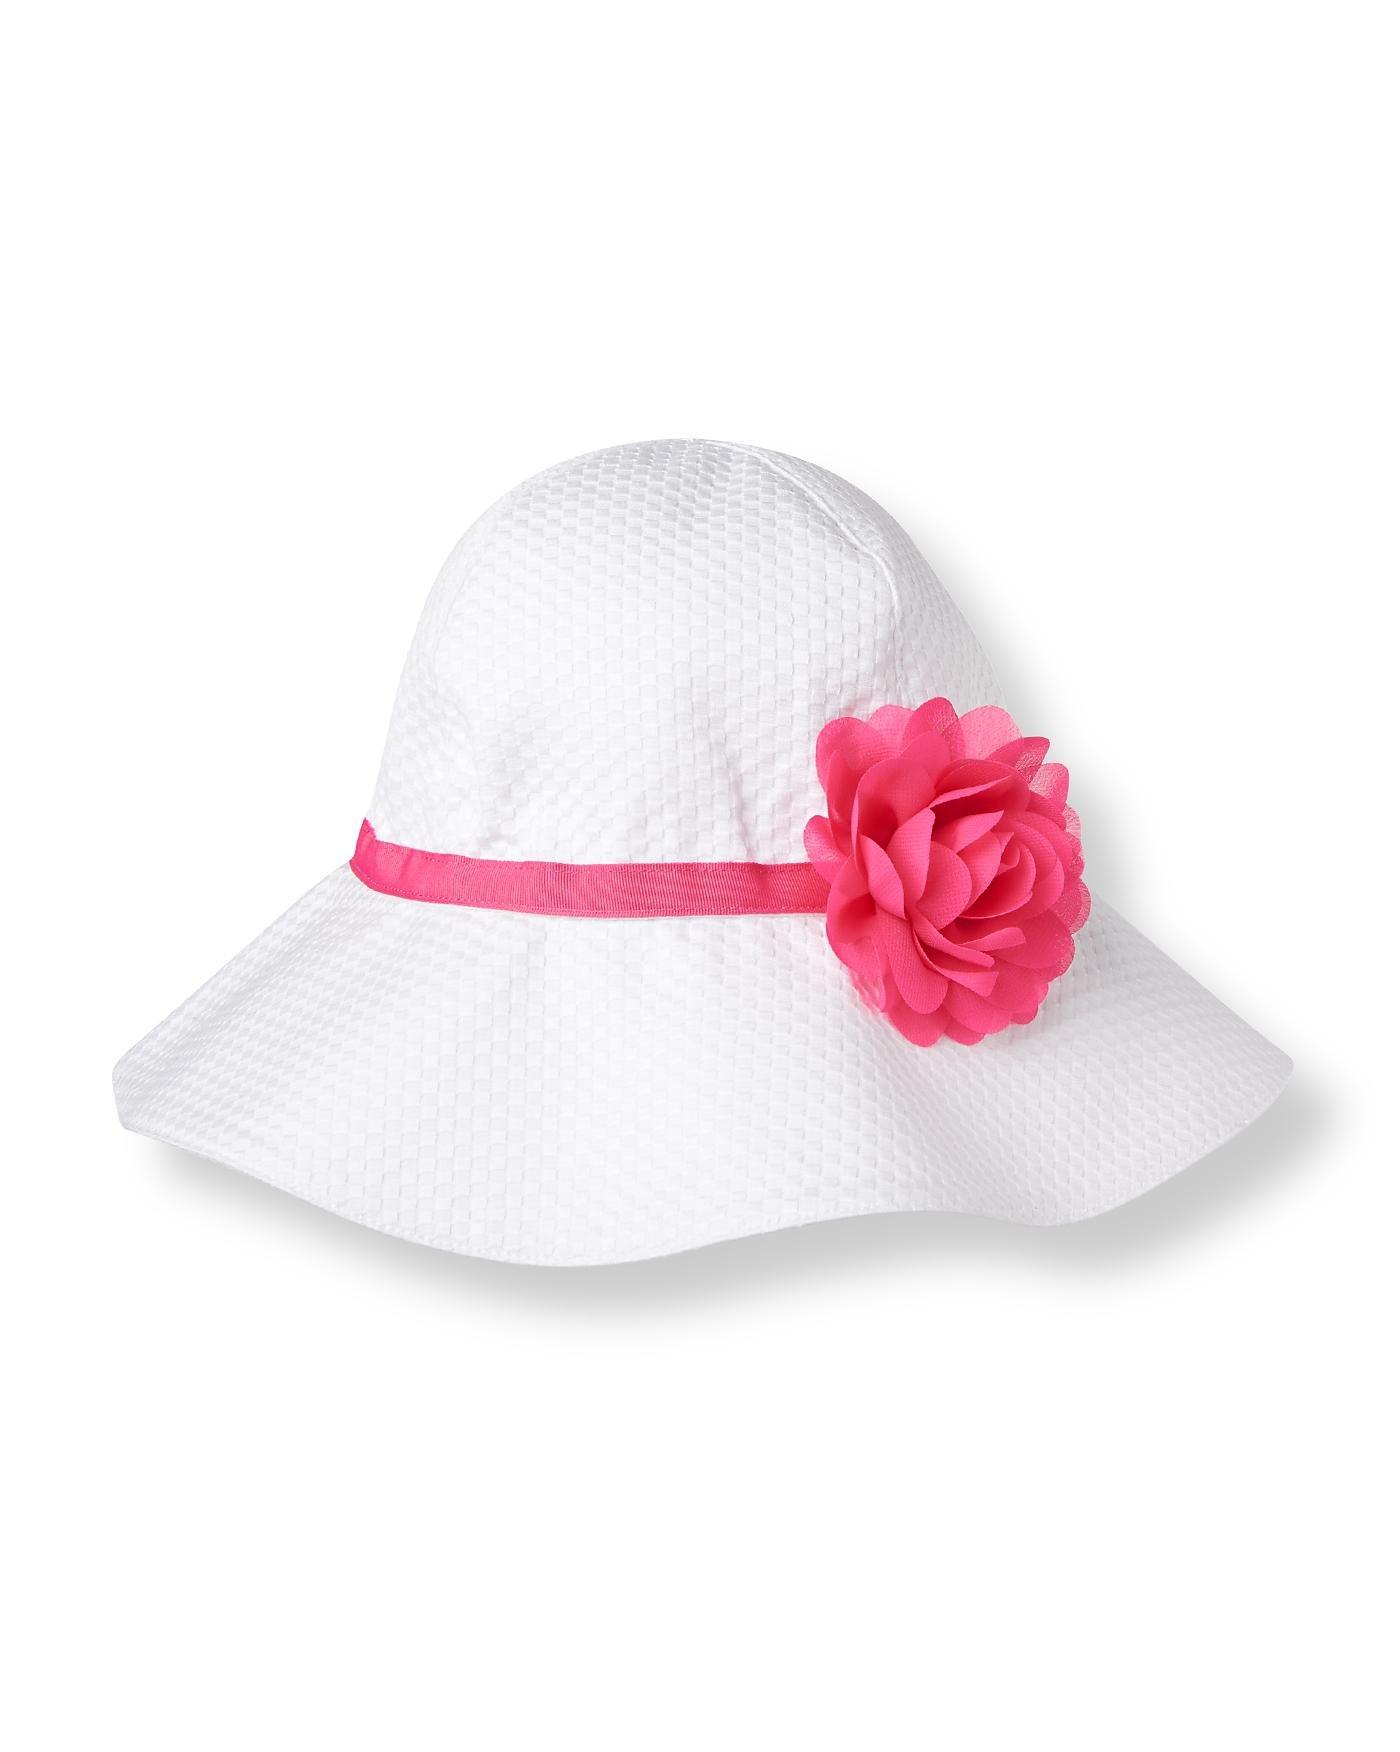 Blossom Sunhat image number 0